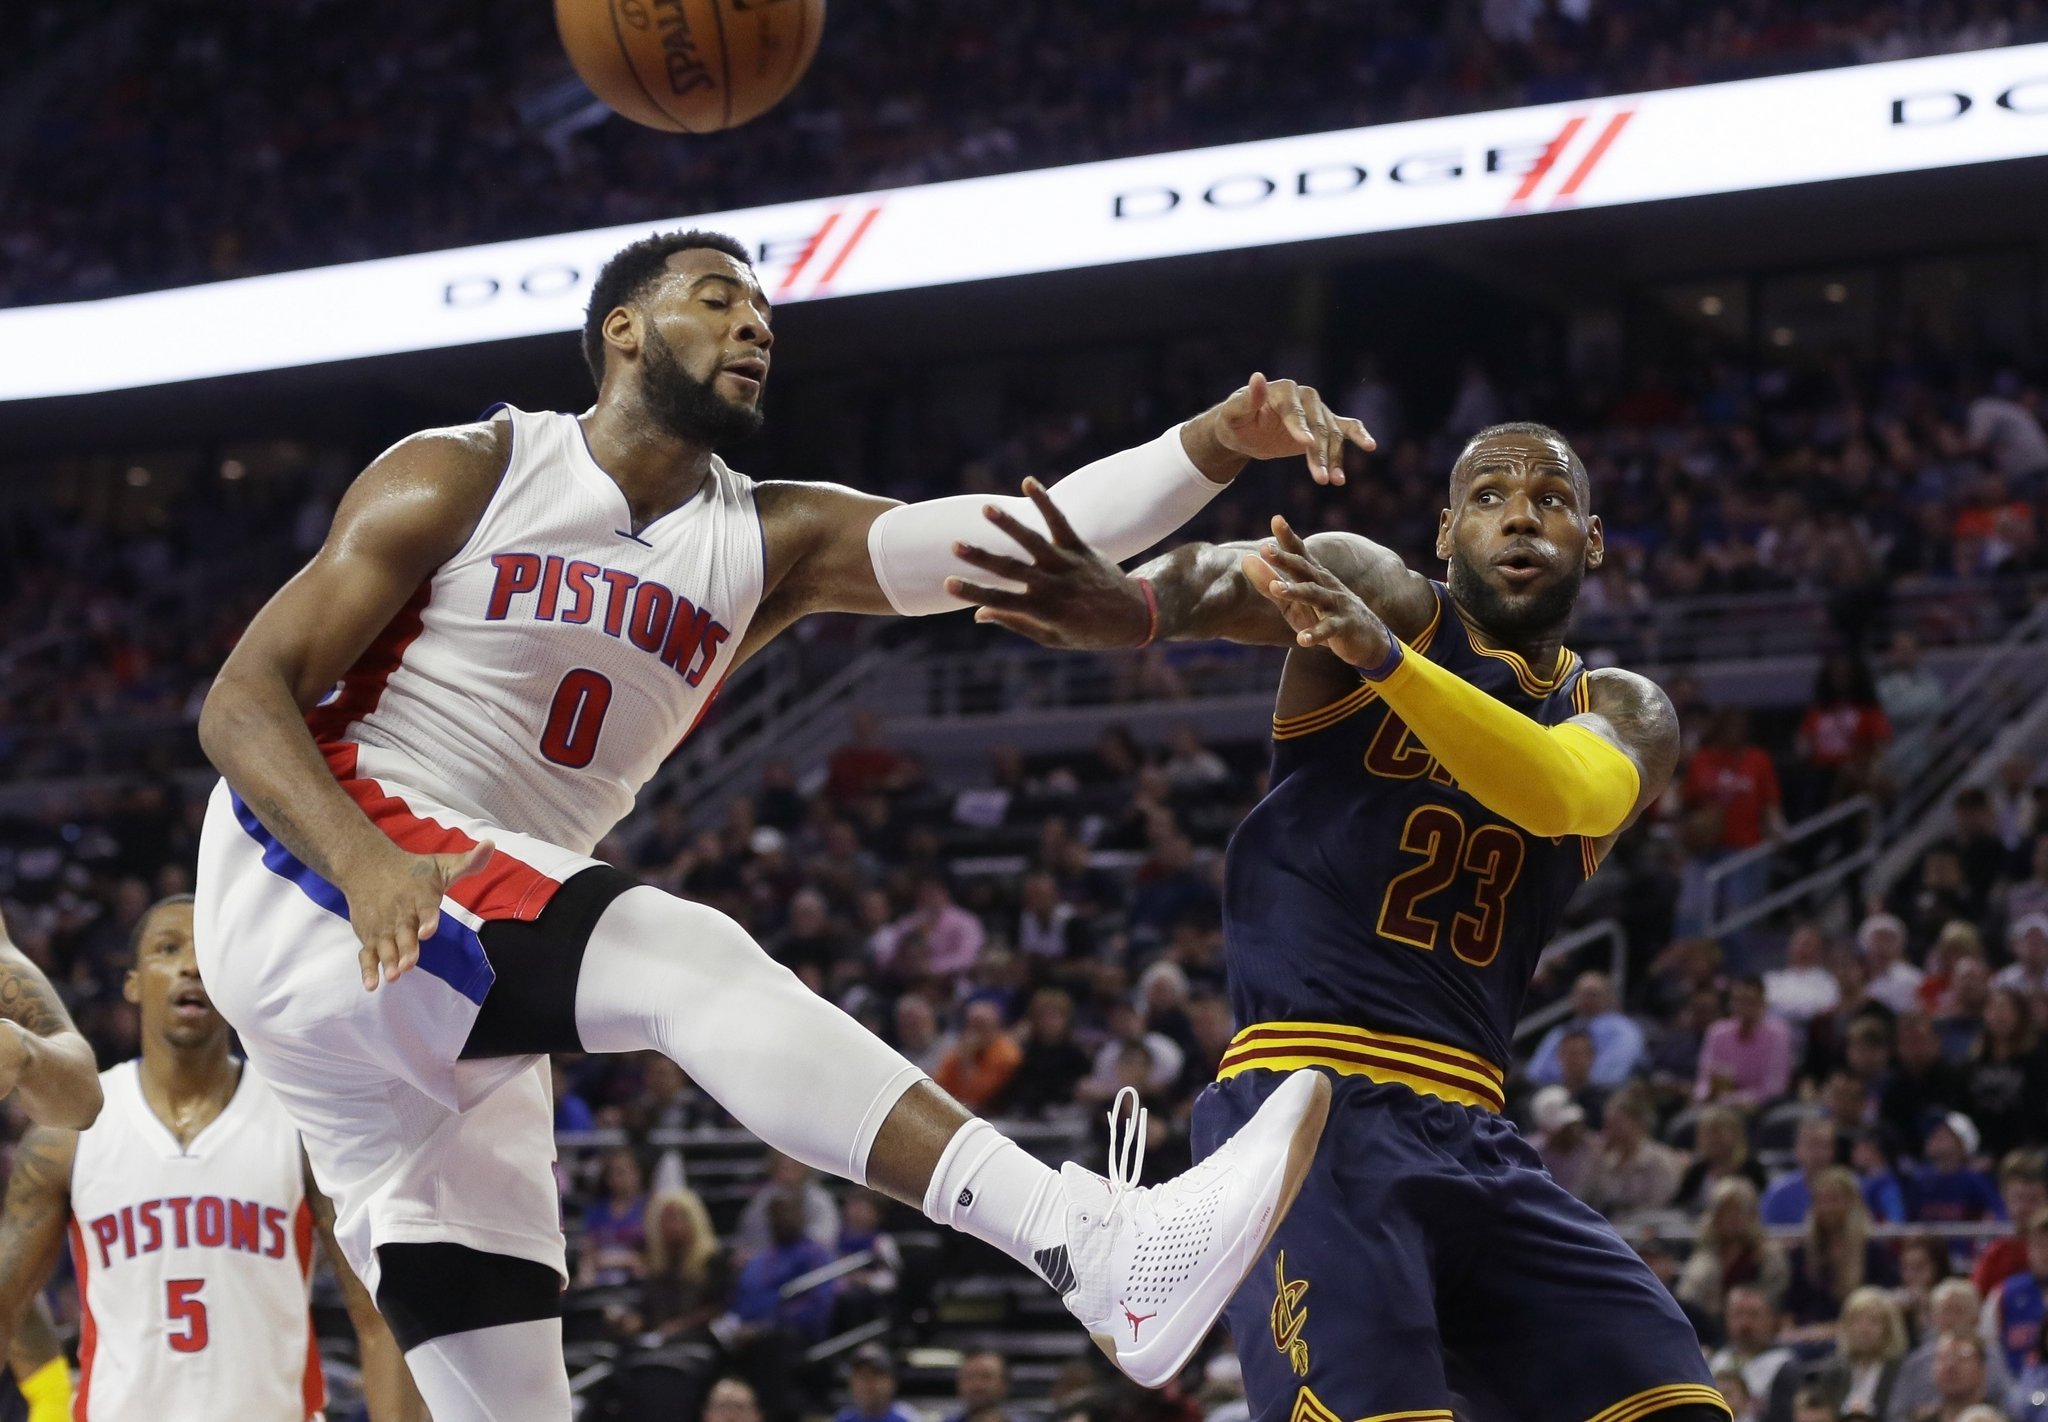 Recap: Pistons 106, Cavaliers 101 (Or, Experiments Don’t Always Work the First Time)